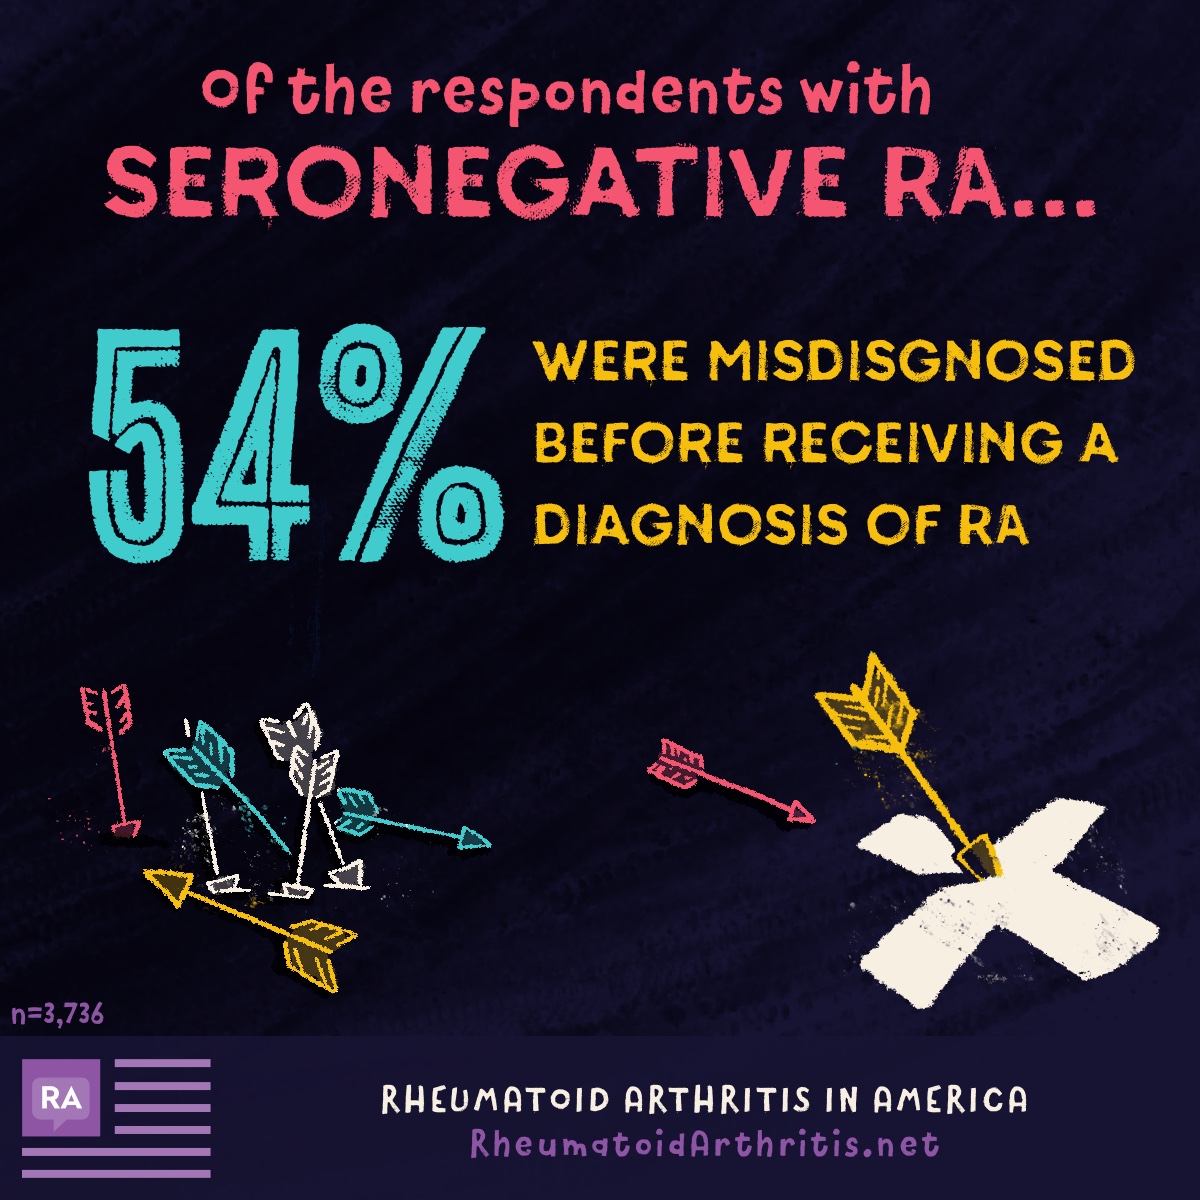 54% of participants polled were misdiagnosed with seronegative RA.